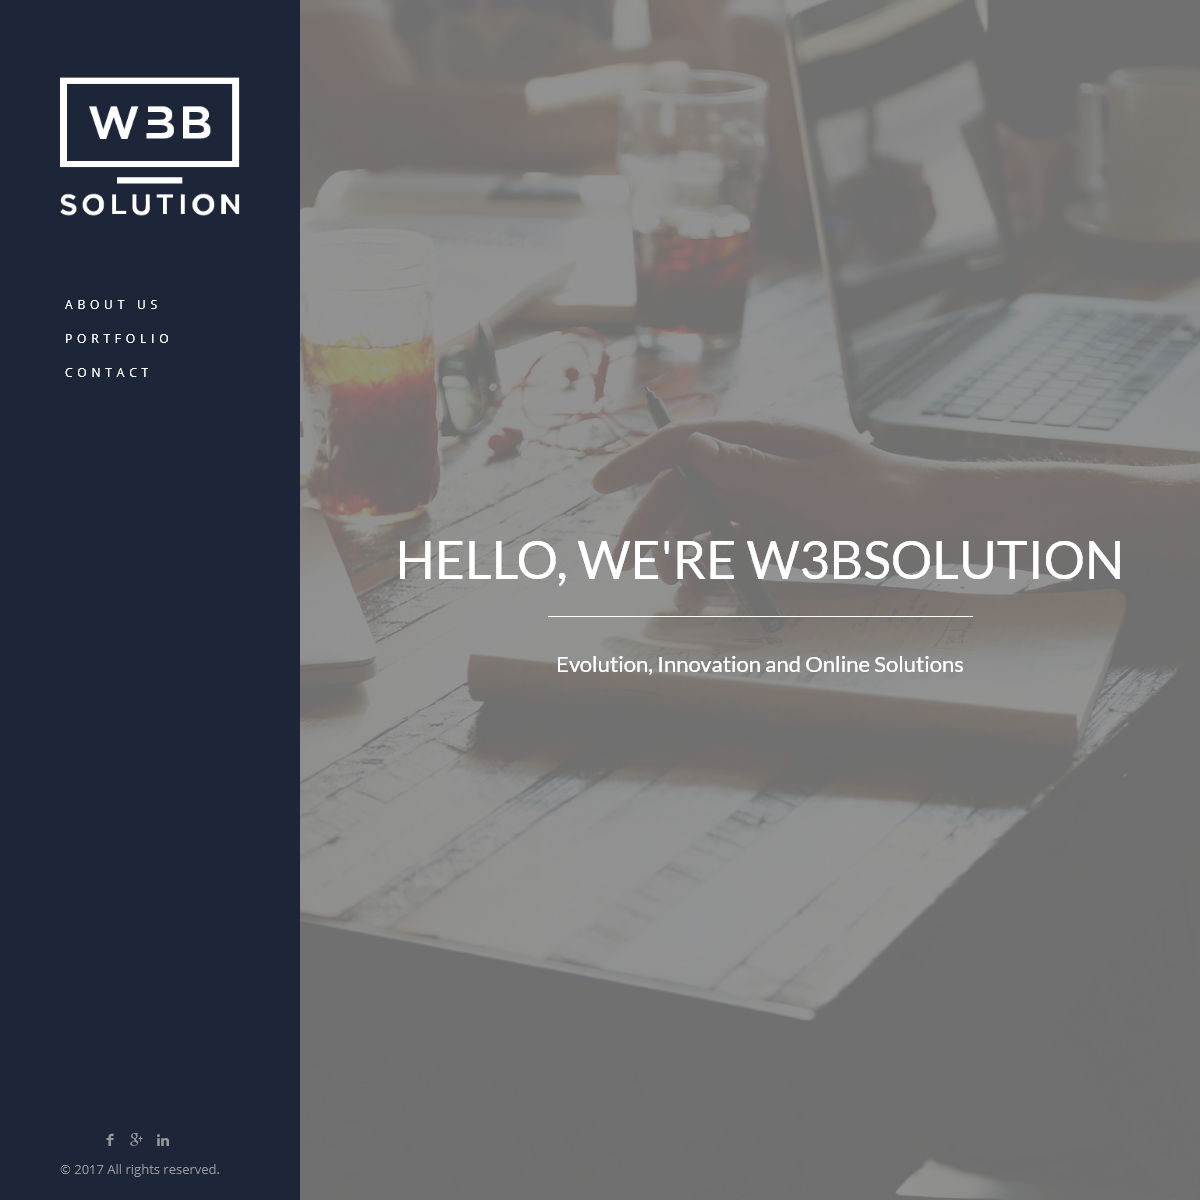 A complete backup of w3bsolution.com